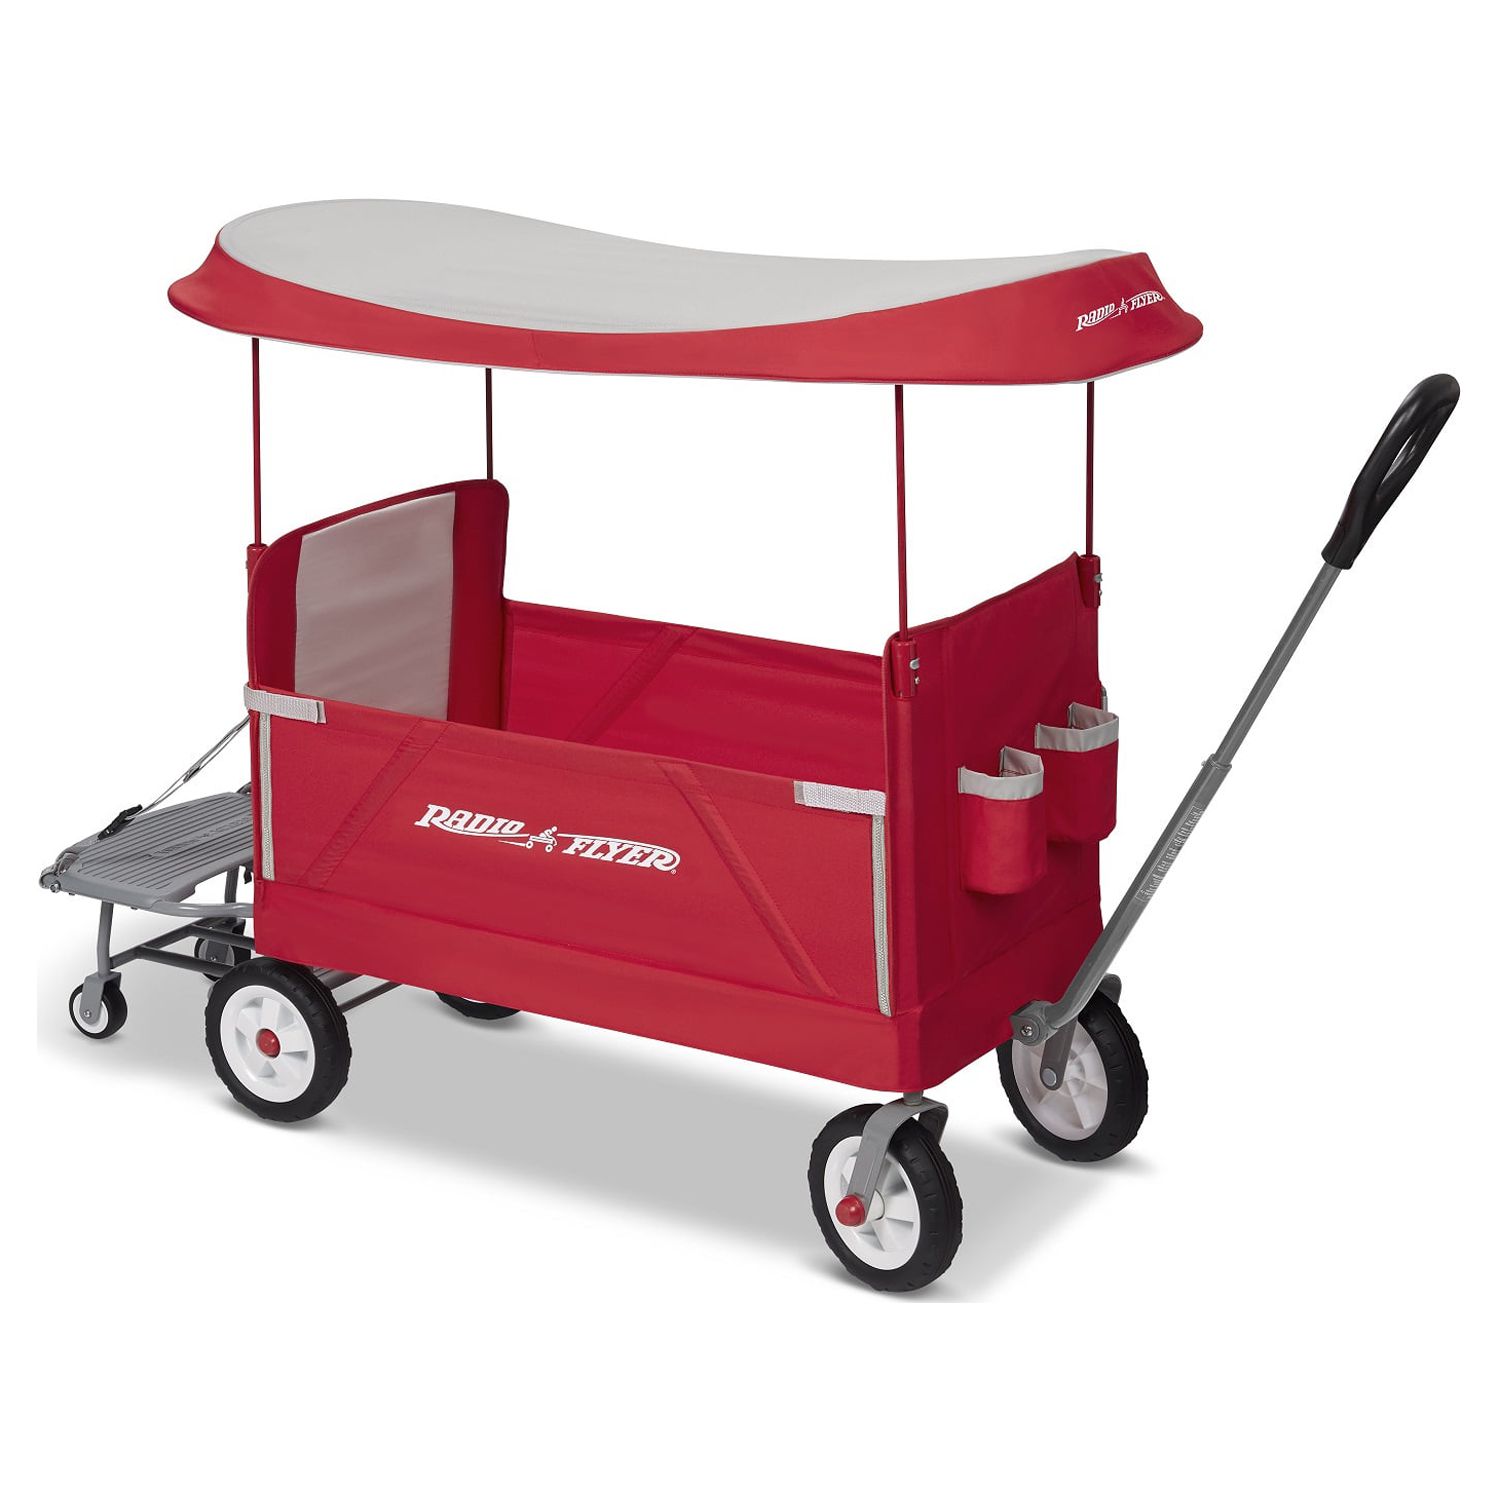 Radio Flyer, 3-in-1 Tailgater Wagon with Canopy, Folding Wagon, Red - image 5 of 20